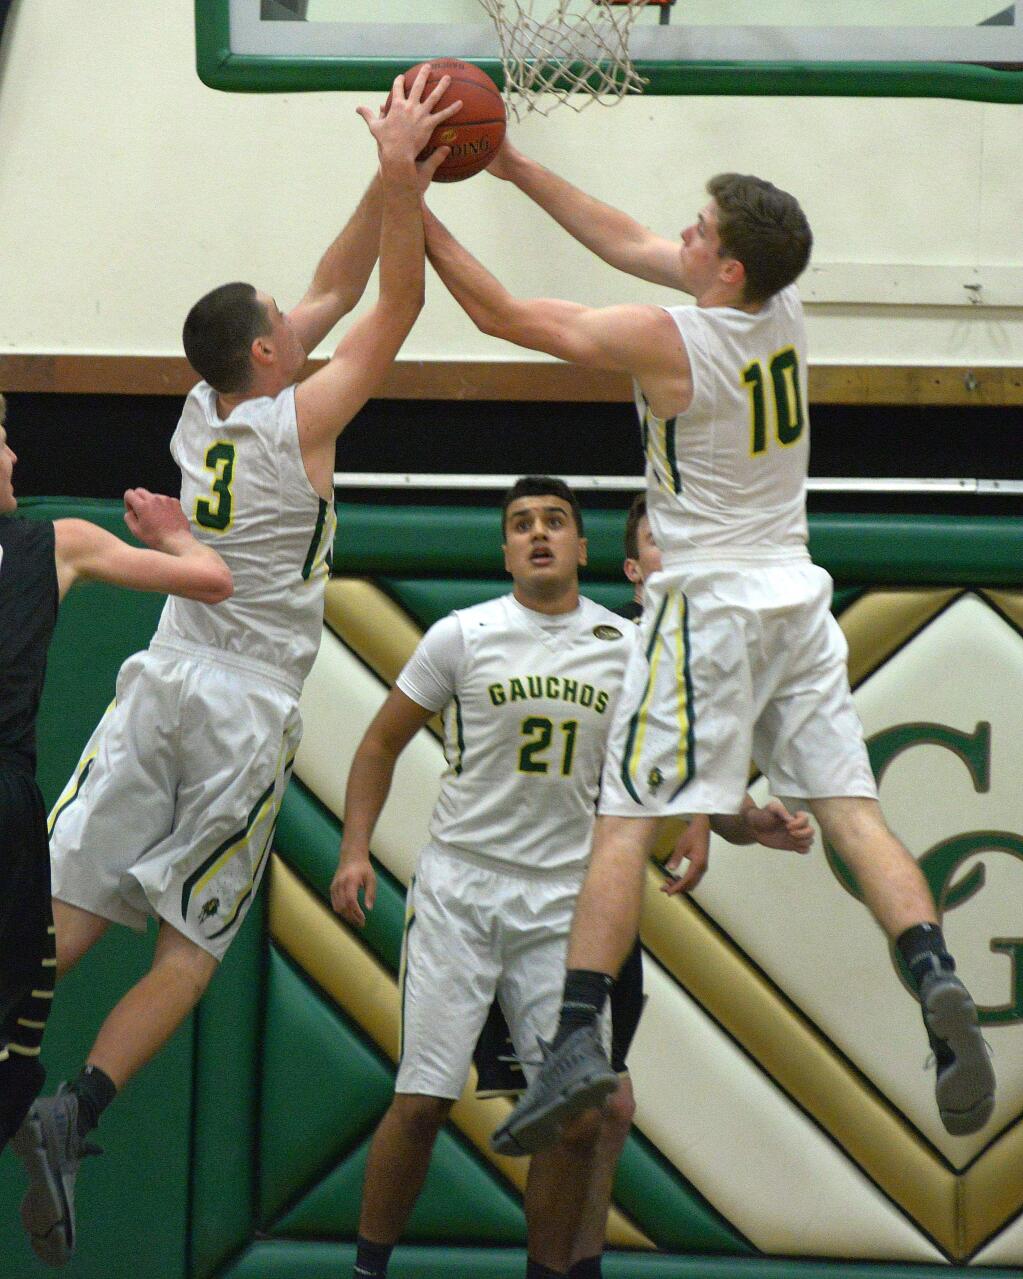 SUMNER FOWLER/FOR THE ARGUS-COURIERCasa Grande teammates Frank Gawronski (3) and Patrick Brodsky (10) battle for a rebound while Vikram Singh (21) looks on in a game against Windsor.